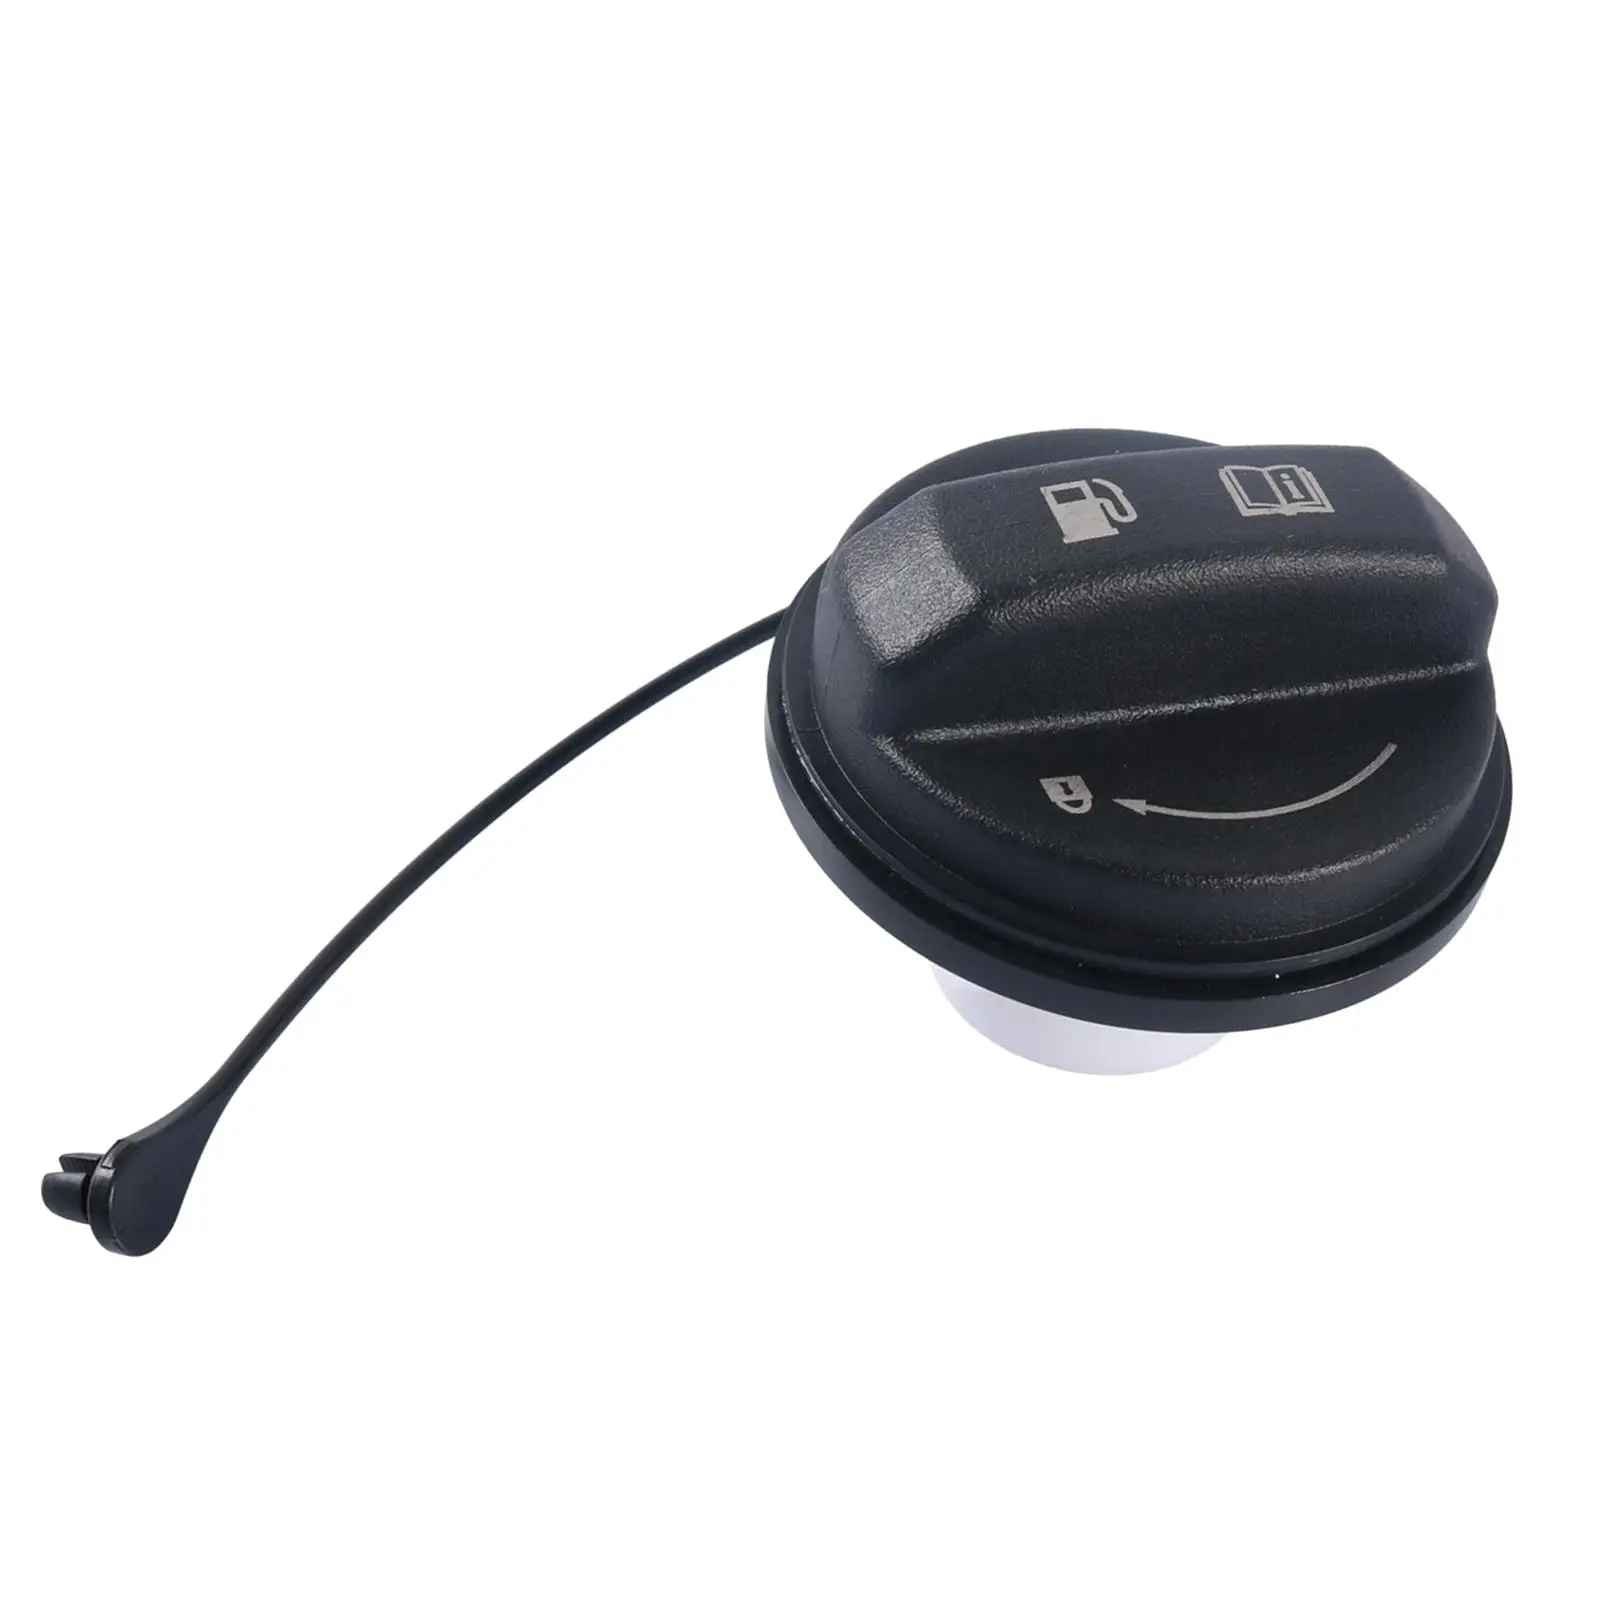 31010-3L600 Car Fuel Filler Cover Protection Gas Tank Fuel Cover Replace Fuel Tank Cover for Hyundai Sonata Car Supplies